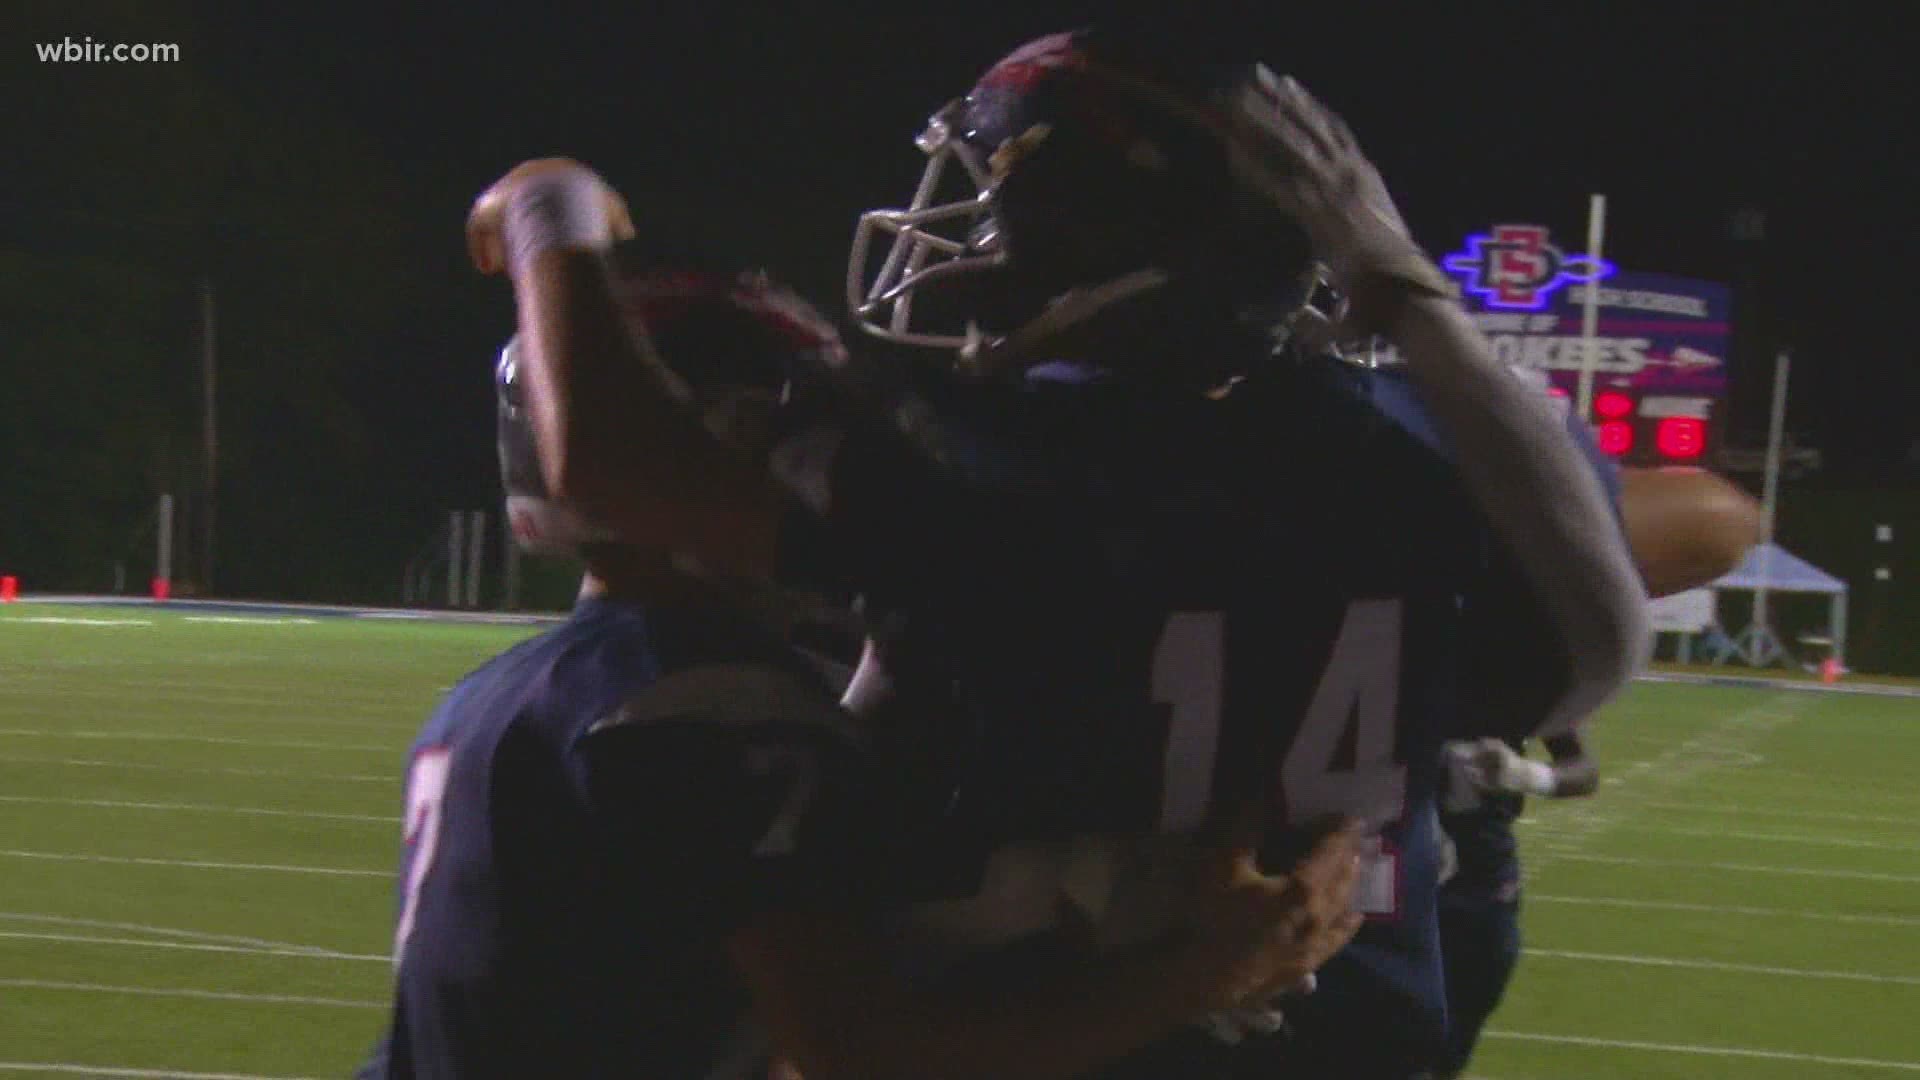 South-Doyle wins its fourth game in a row, this time against Carter.